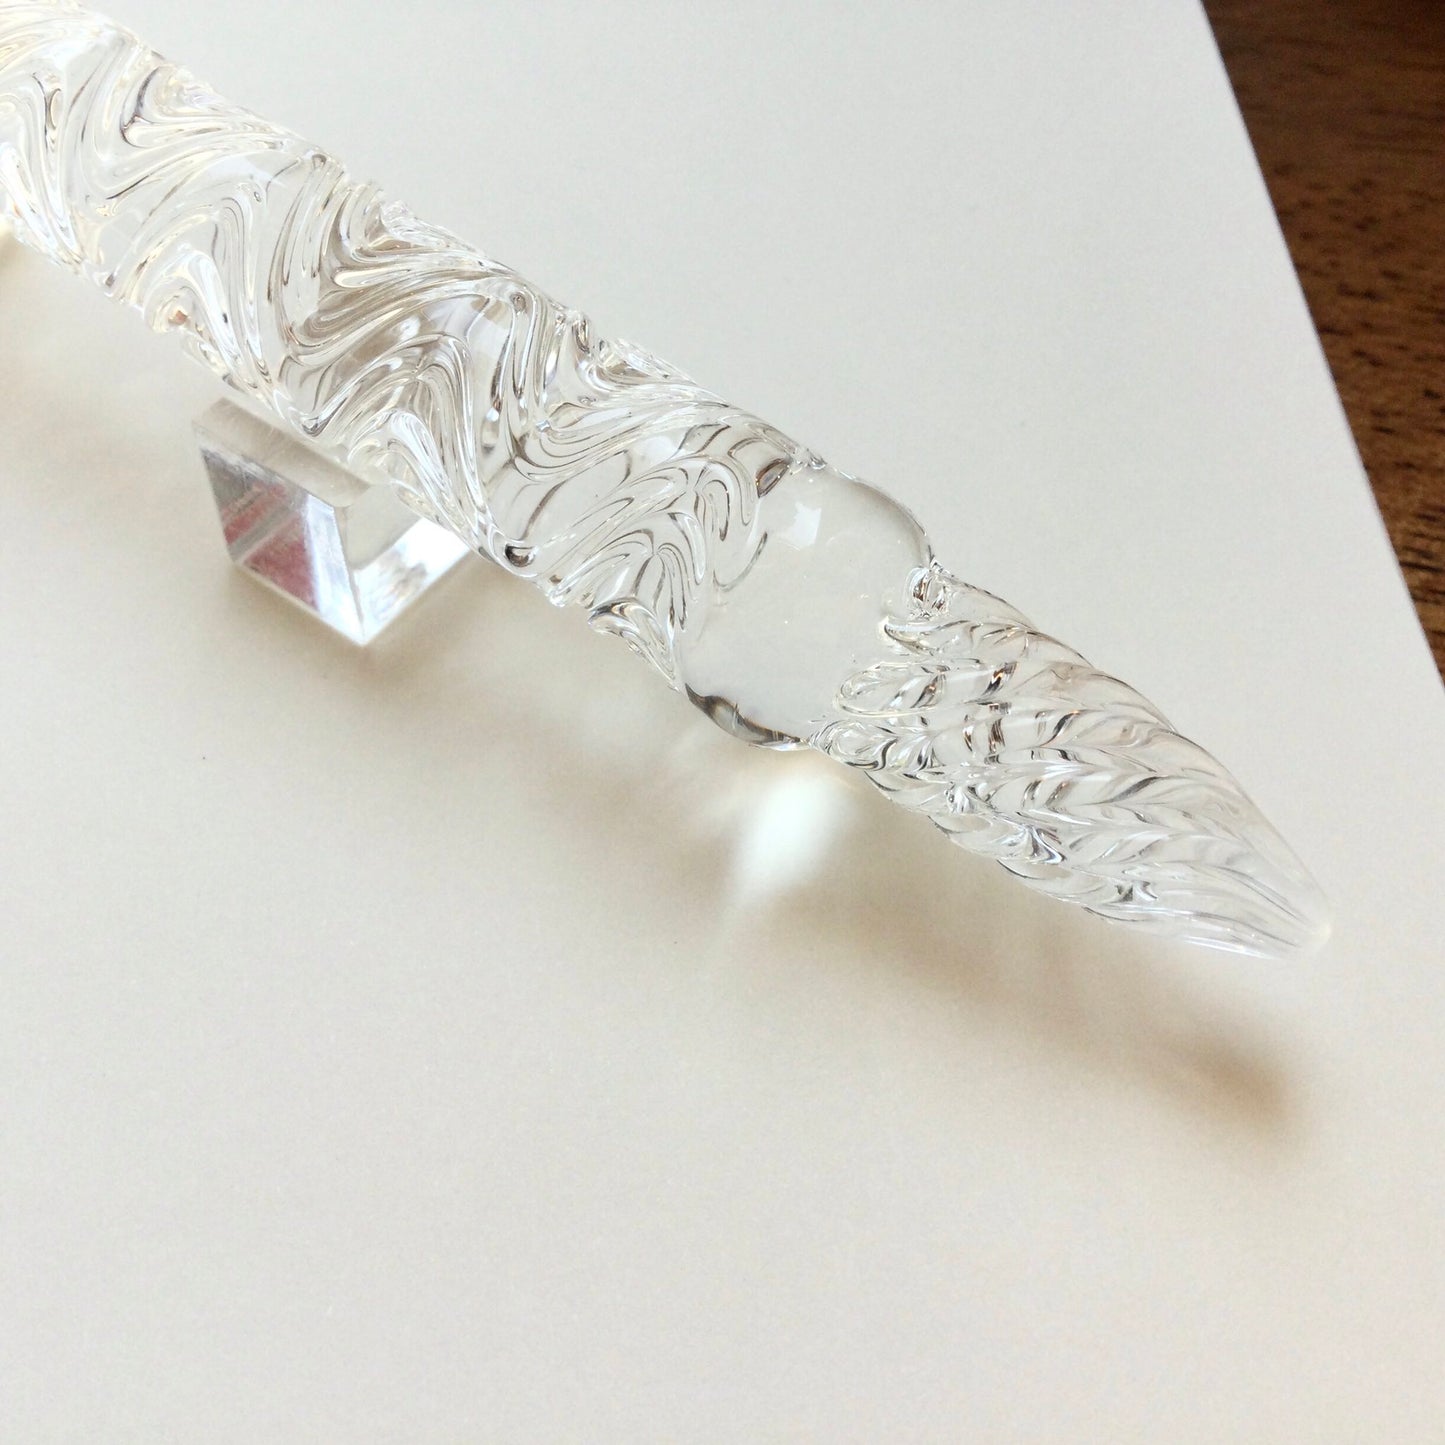 [Synchronicity Glass Art] Glass Pen "Swell dual-sided"